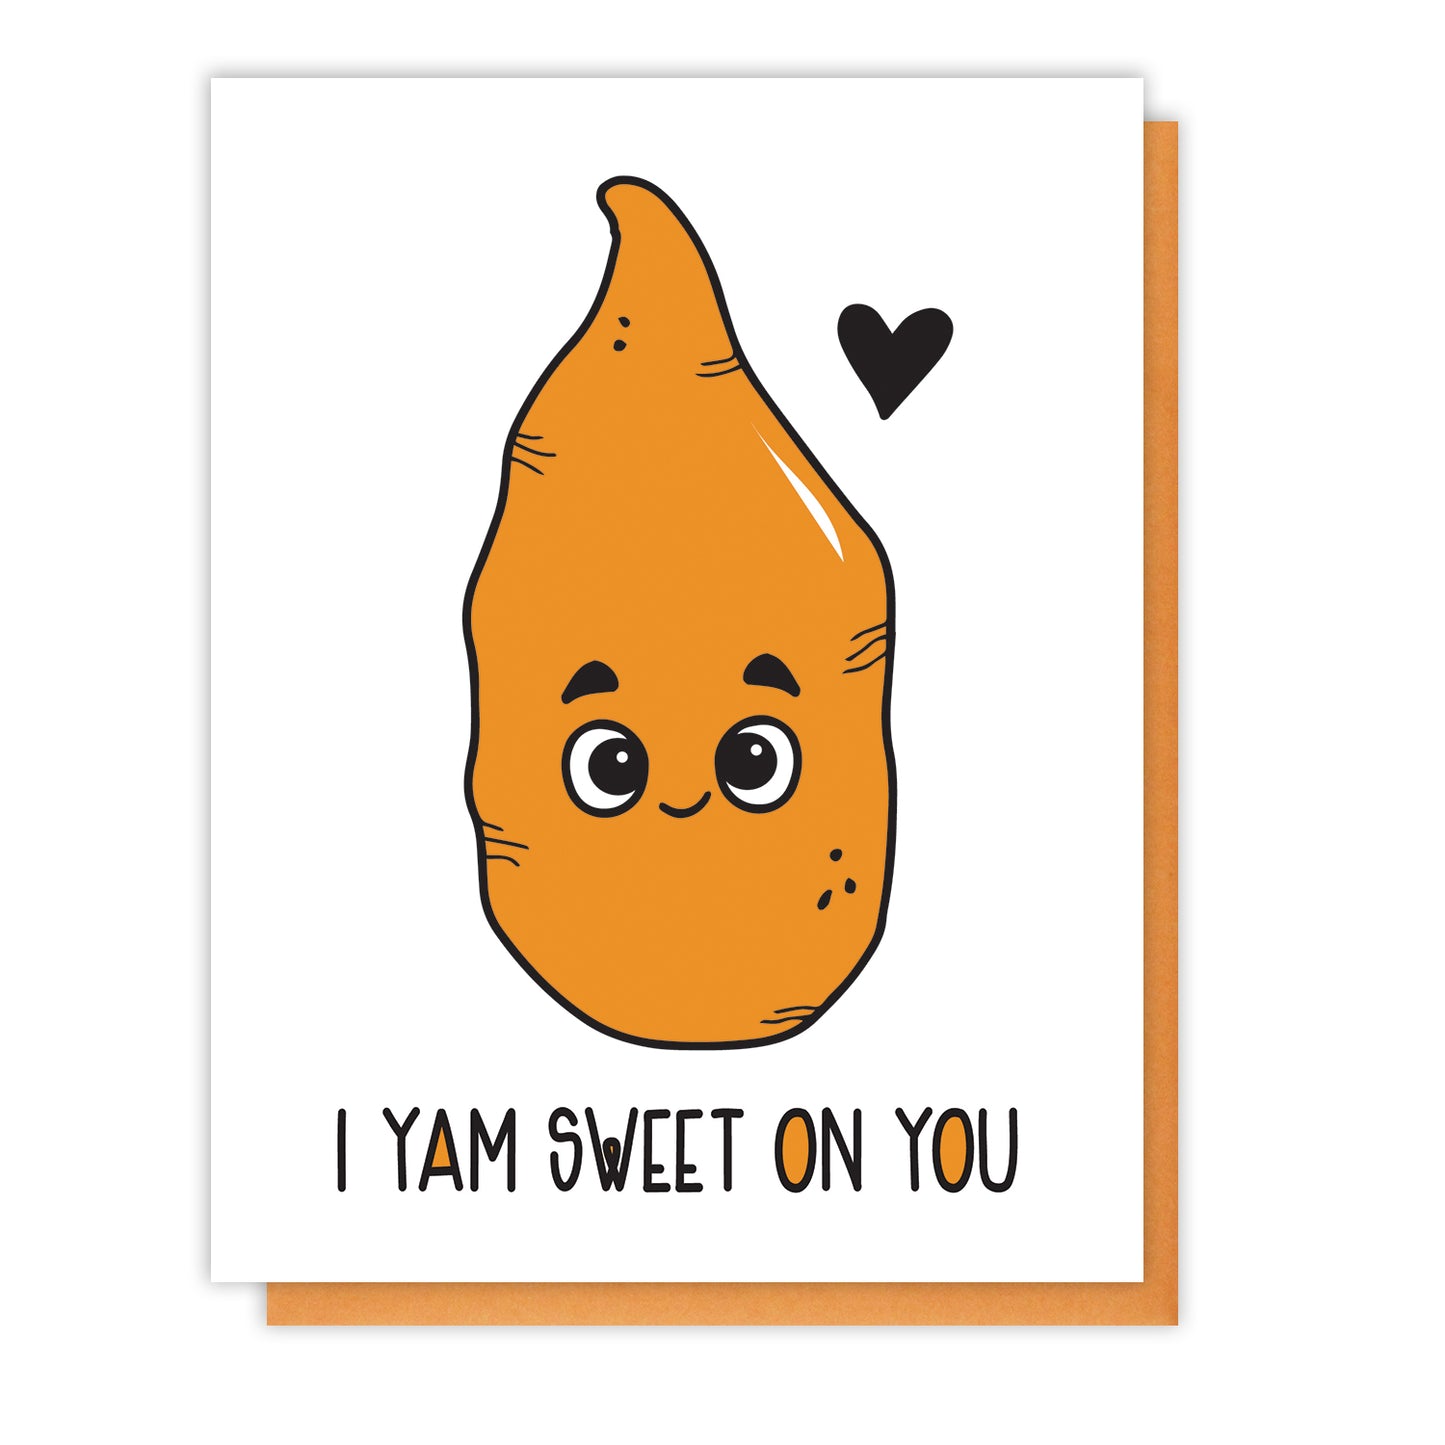 NEW! Funny Love Letterpress Card | Yam Pun | Valentine's Day | kiss and punch - Kiss and Punch